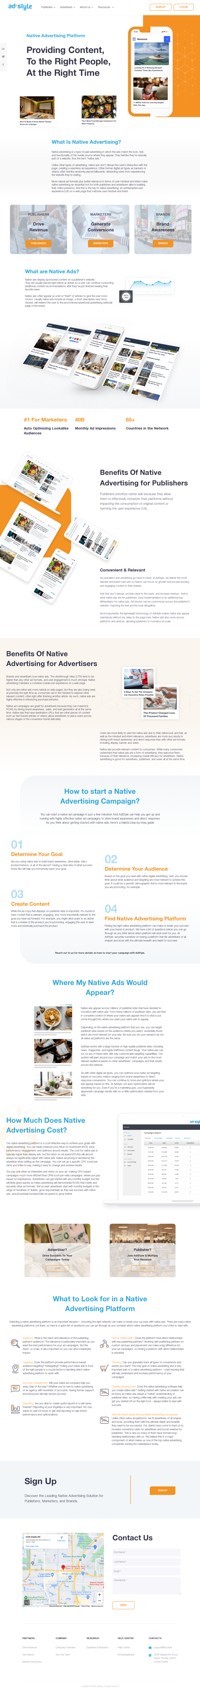 Native advertising is a type of paid advertising that matches the look, feel, and functionality of the media source where they appear. Unlike other types of advertising, native ads don't disrupt the user's interaction with the page, creating a seamless ad experience. They are an essential tool for both publishers and advertisers in building their online presence. Native ads display sponsored content on a publisher's website, often appearing below an article as a list or "feed" of articles. They include an image and short description, and once clicked, redirect the user to the promotional advertorial page of the brand. For publishers, native ads allow them to effectively monetize their platforms without impacting user experience. For advertisers, they maintain a cohesive user experience on a web page, maximizing ROAS by driving brand awareness, sales, and lead generation all at the same time.